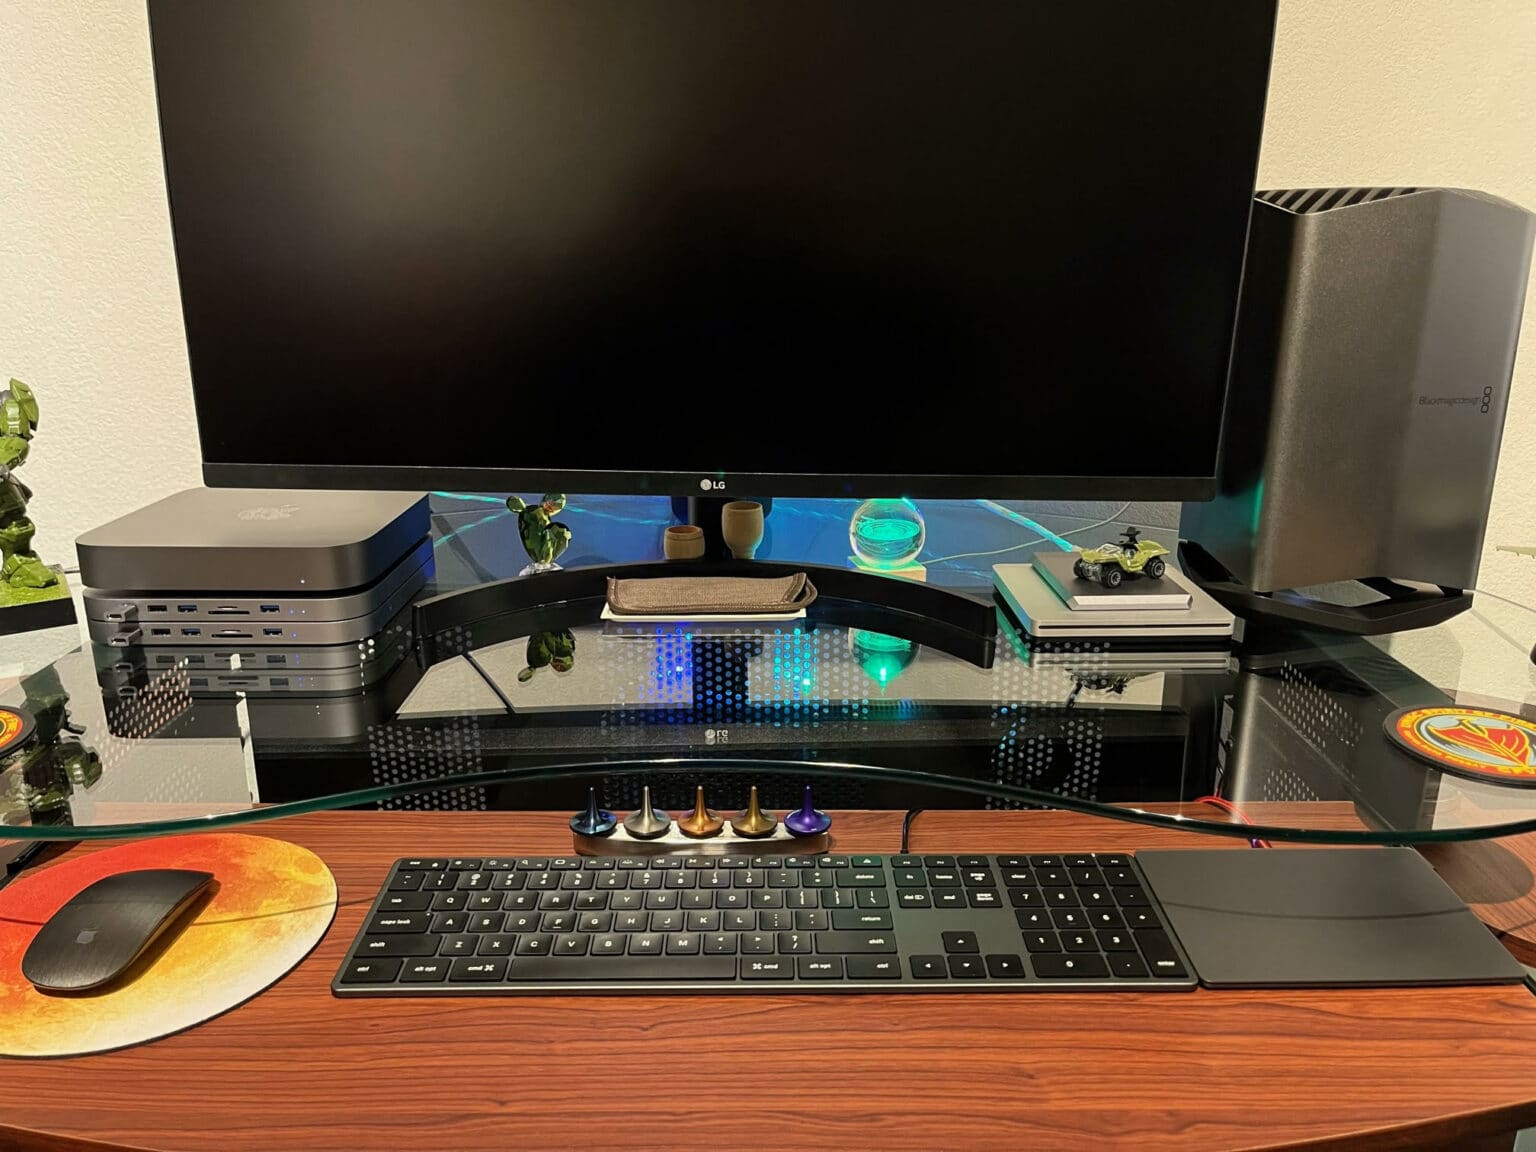 An Intel Mac mini sits atop Satechi hubs to the left of the LG 4K display. An eGPU with a potent graphics card stands to the right.